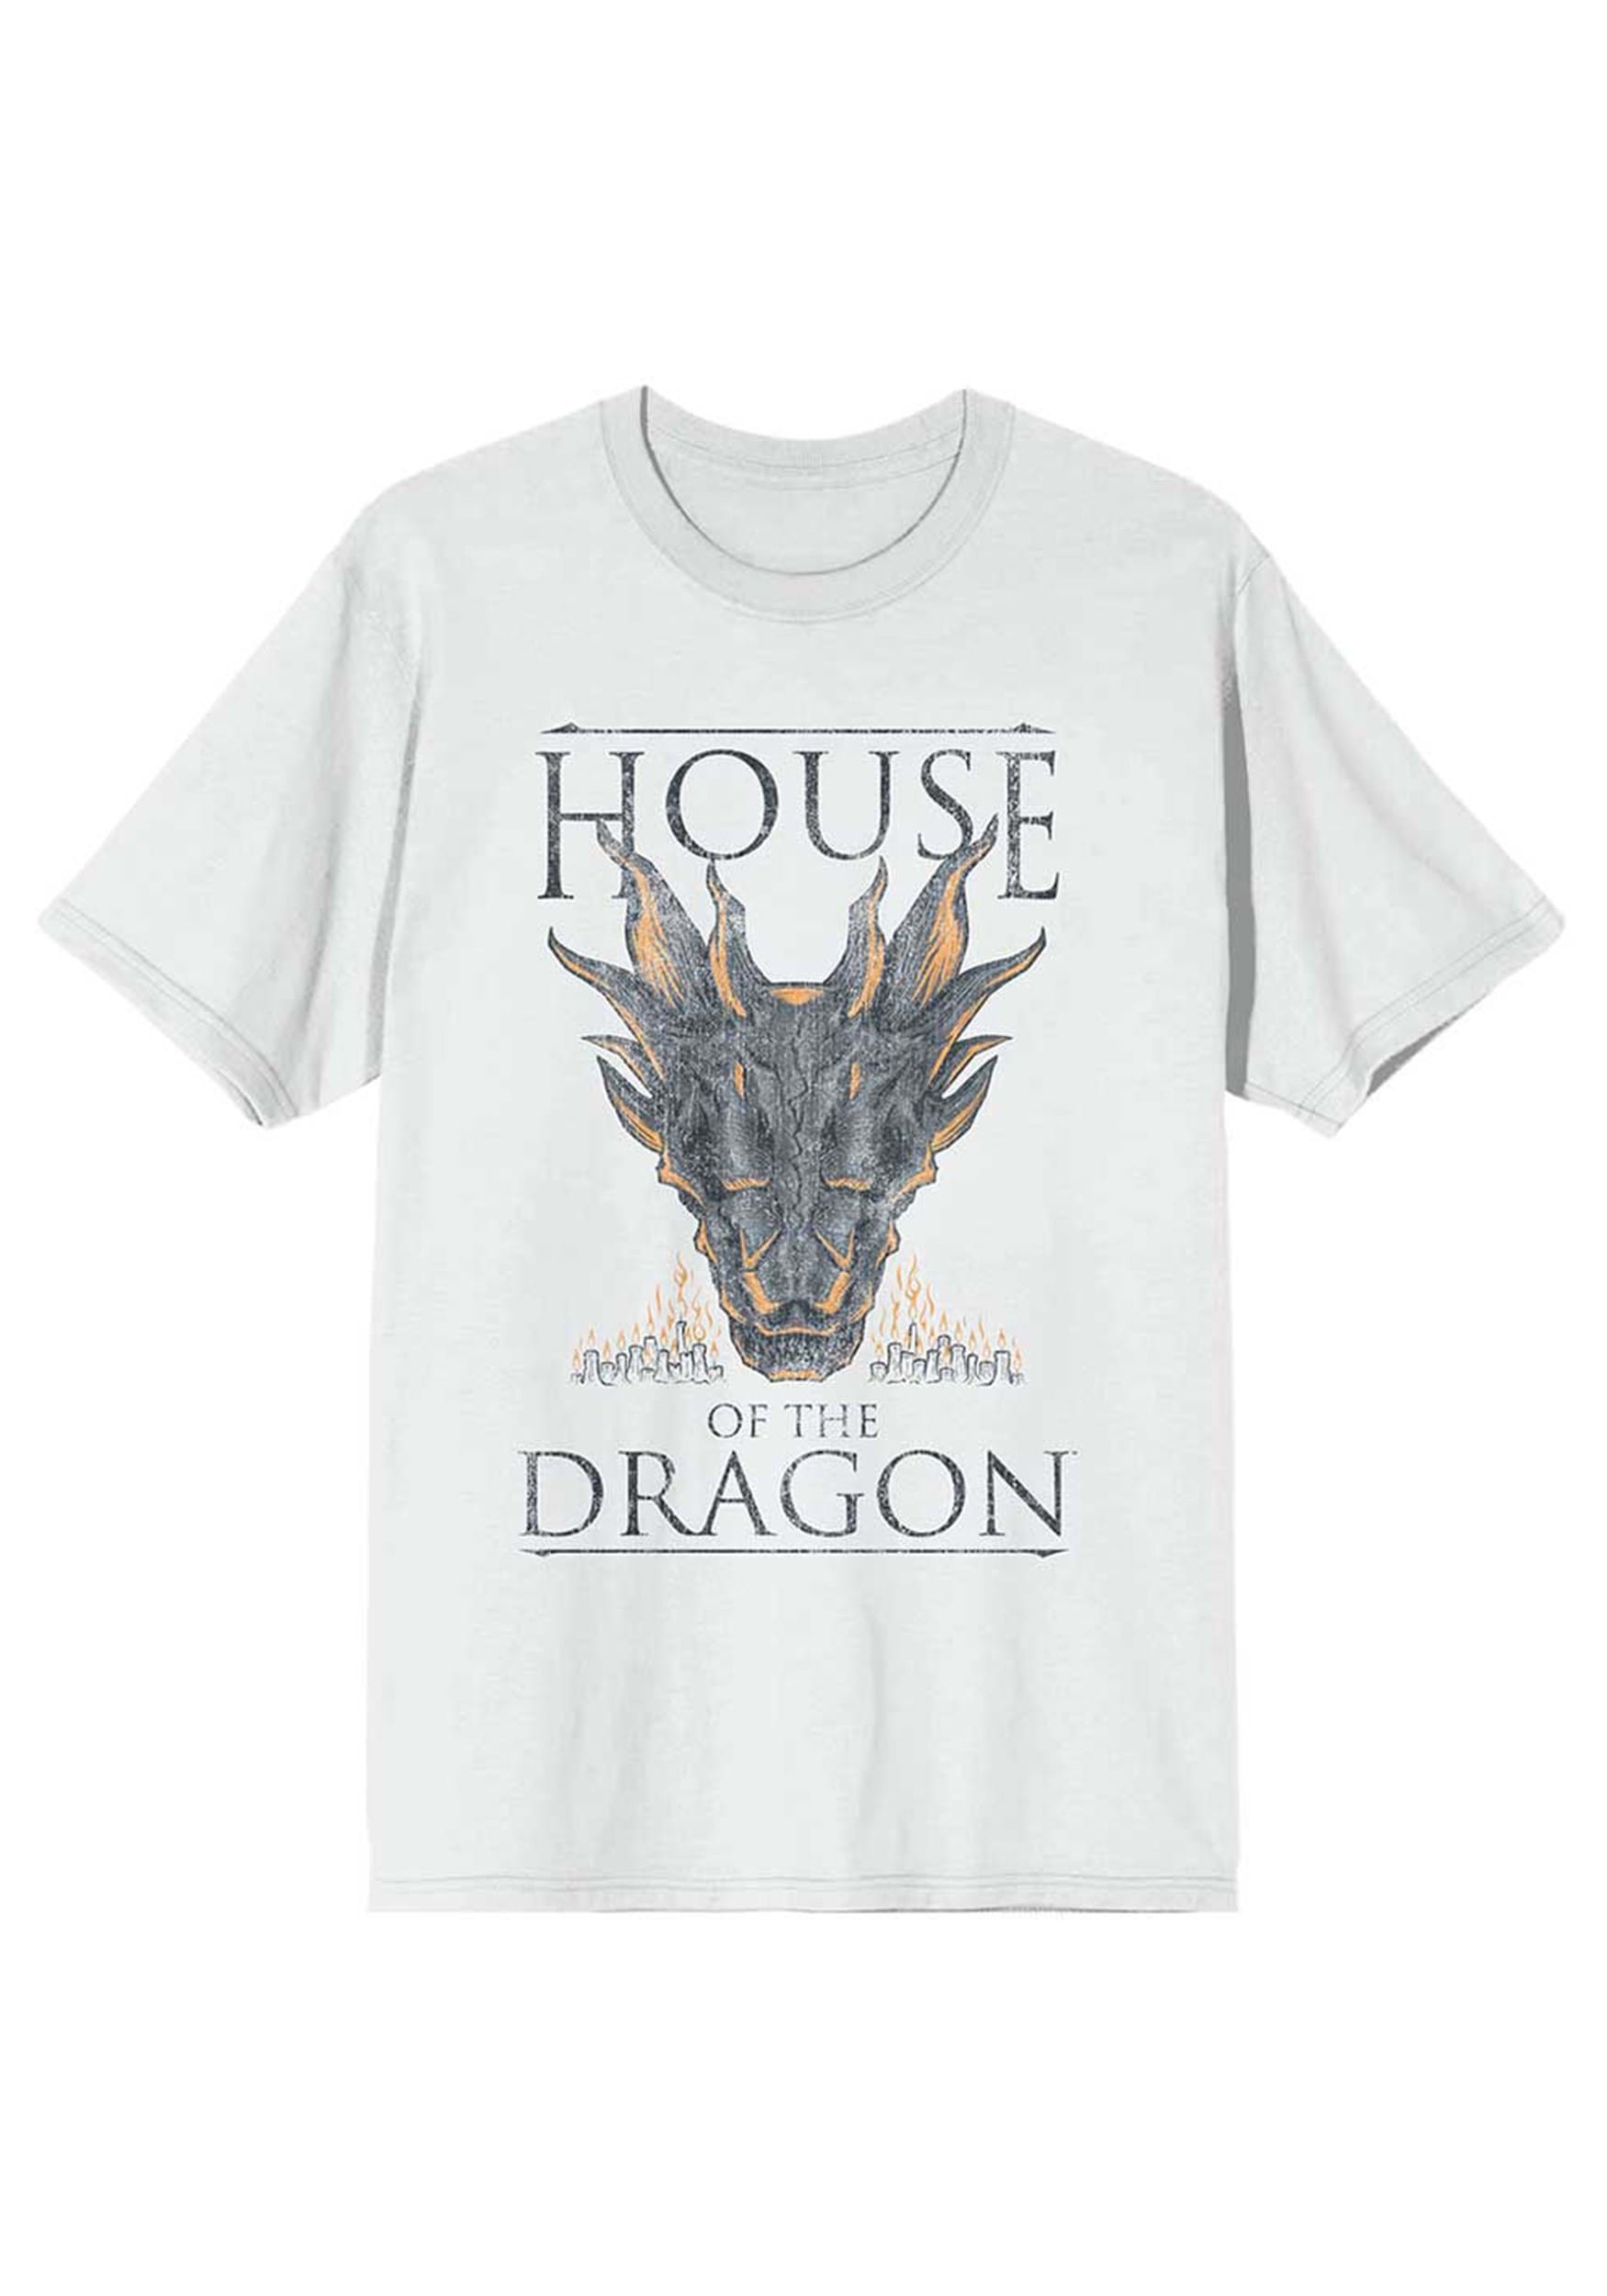 House Of The Dragon Graphic Tee , House Of The Dragon Apparel